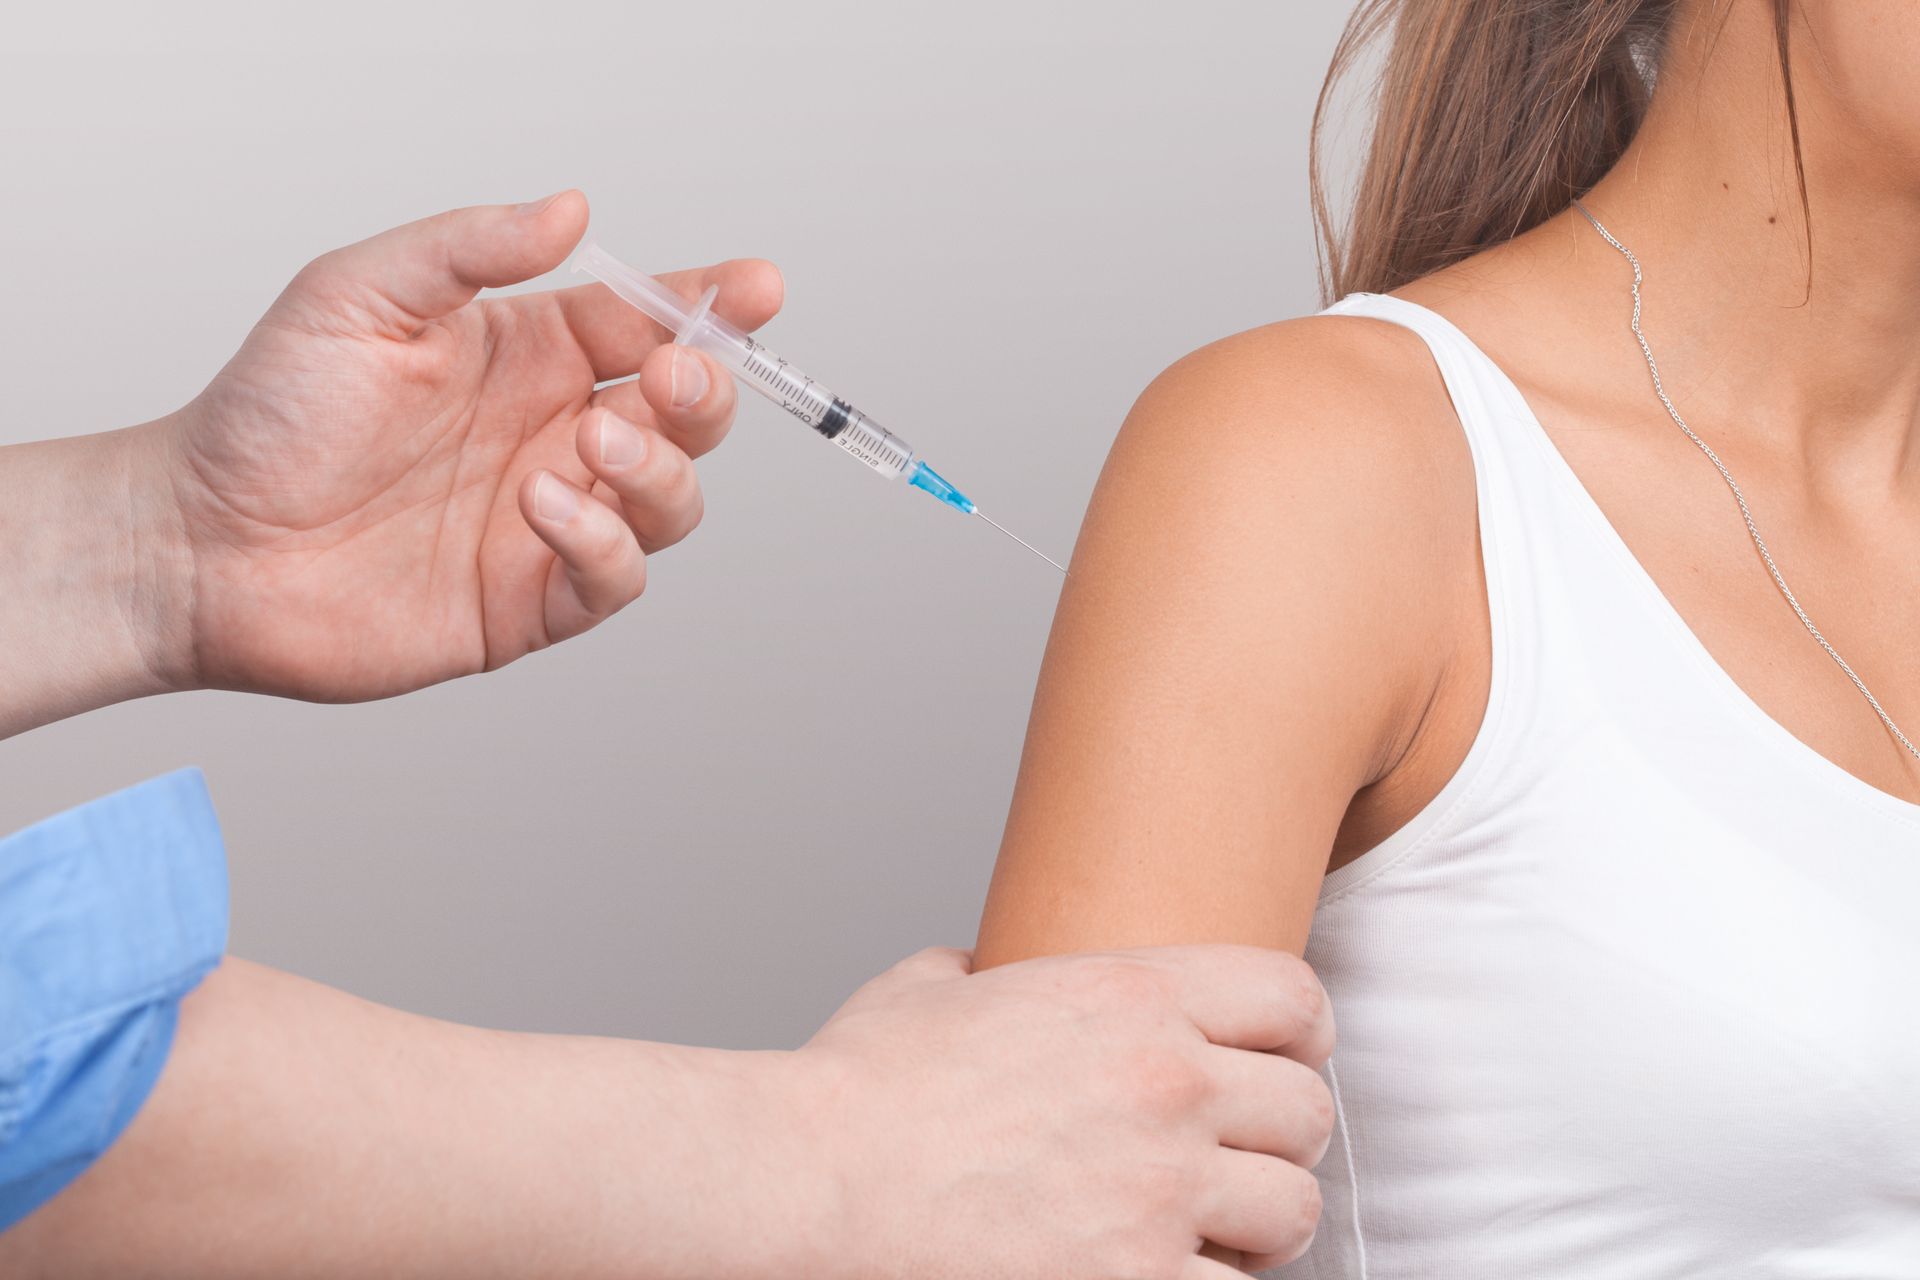 a woman is getting an injection in her arm